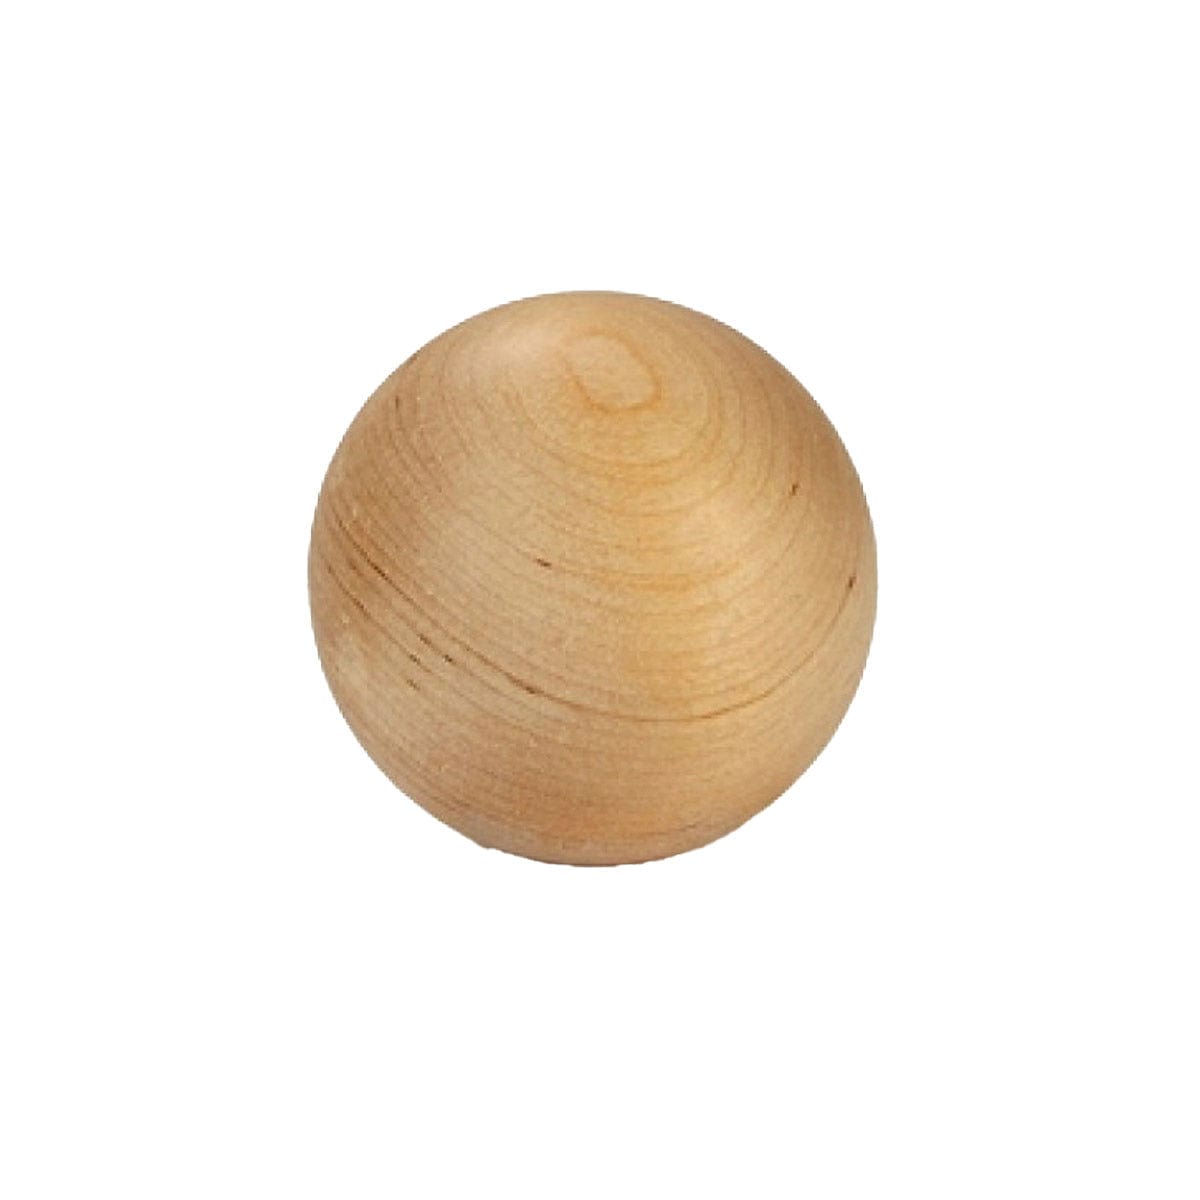 Small wooden ball used to increase stickhandling and puck control skills. Wooden ball, medicine ball, Swedish ball, stickhandling, training, skills.